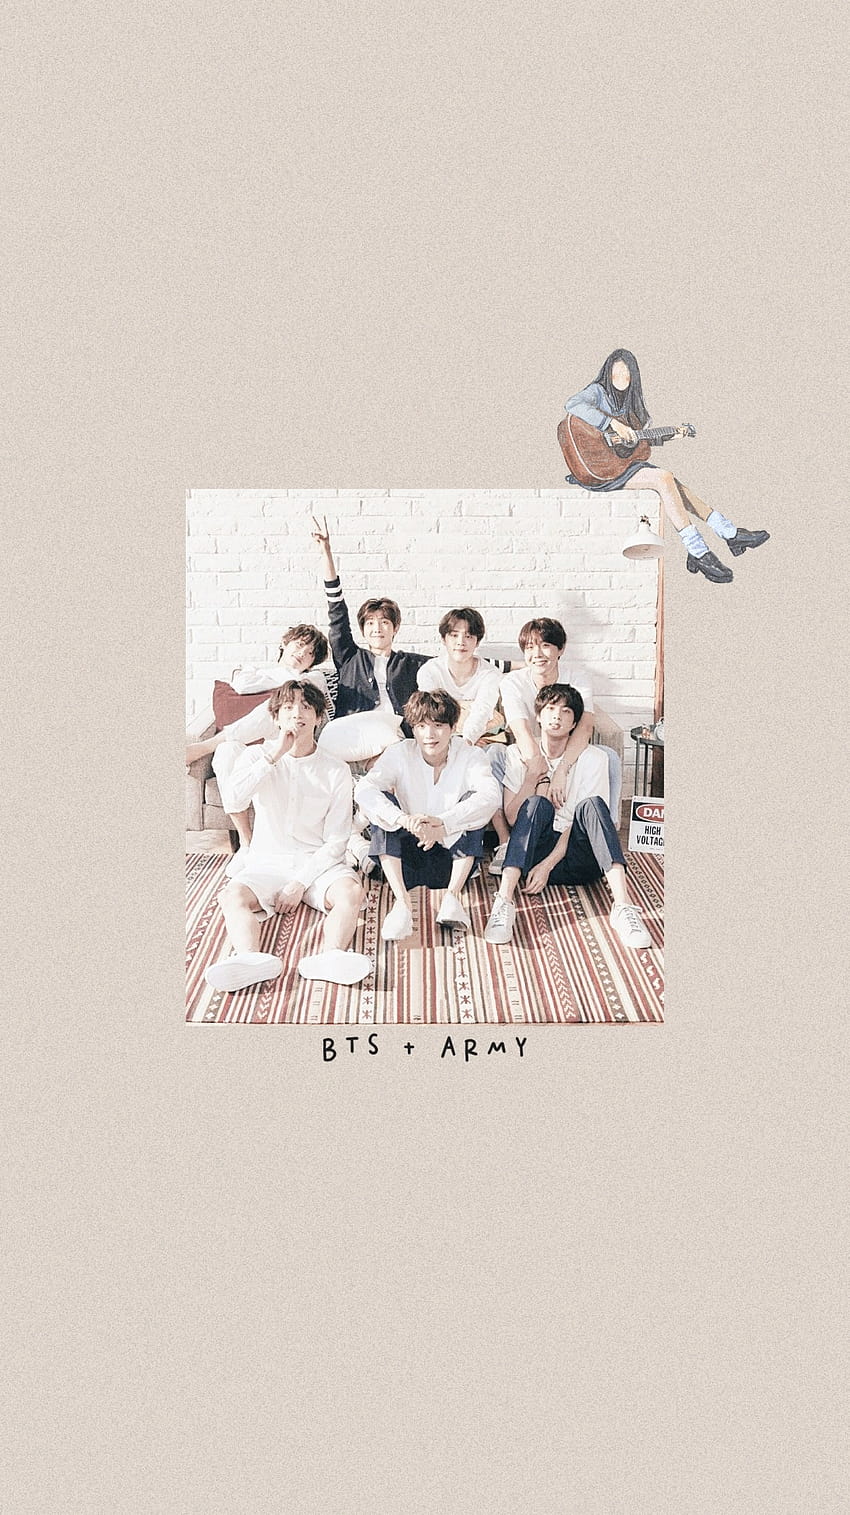 Bts Army Wallpaper Iphone Android Bts Army Bts Army Wallpaper Bts Wallpaper Iphone - BTS